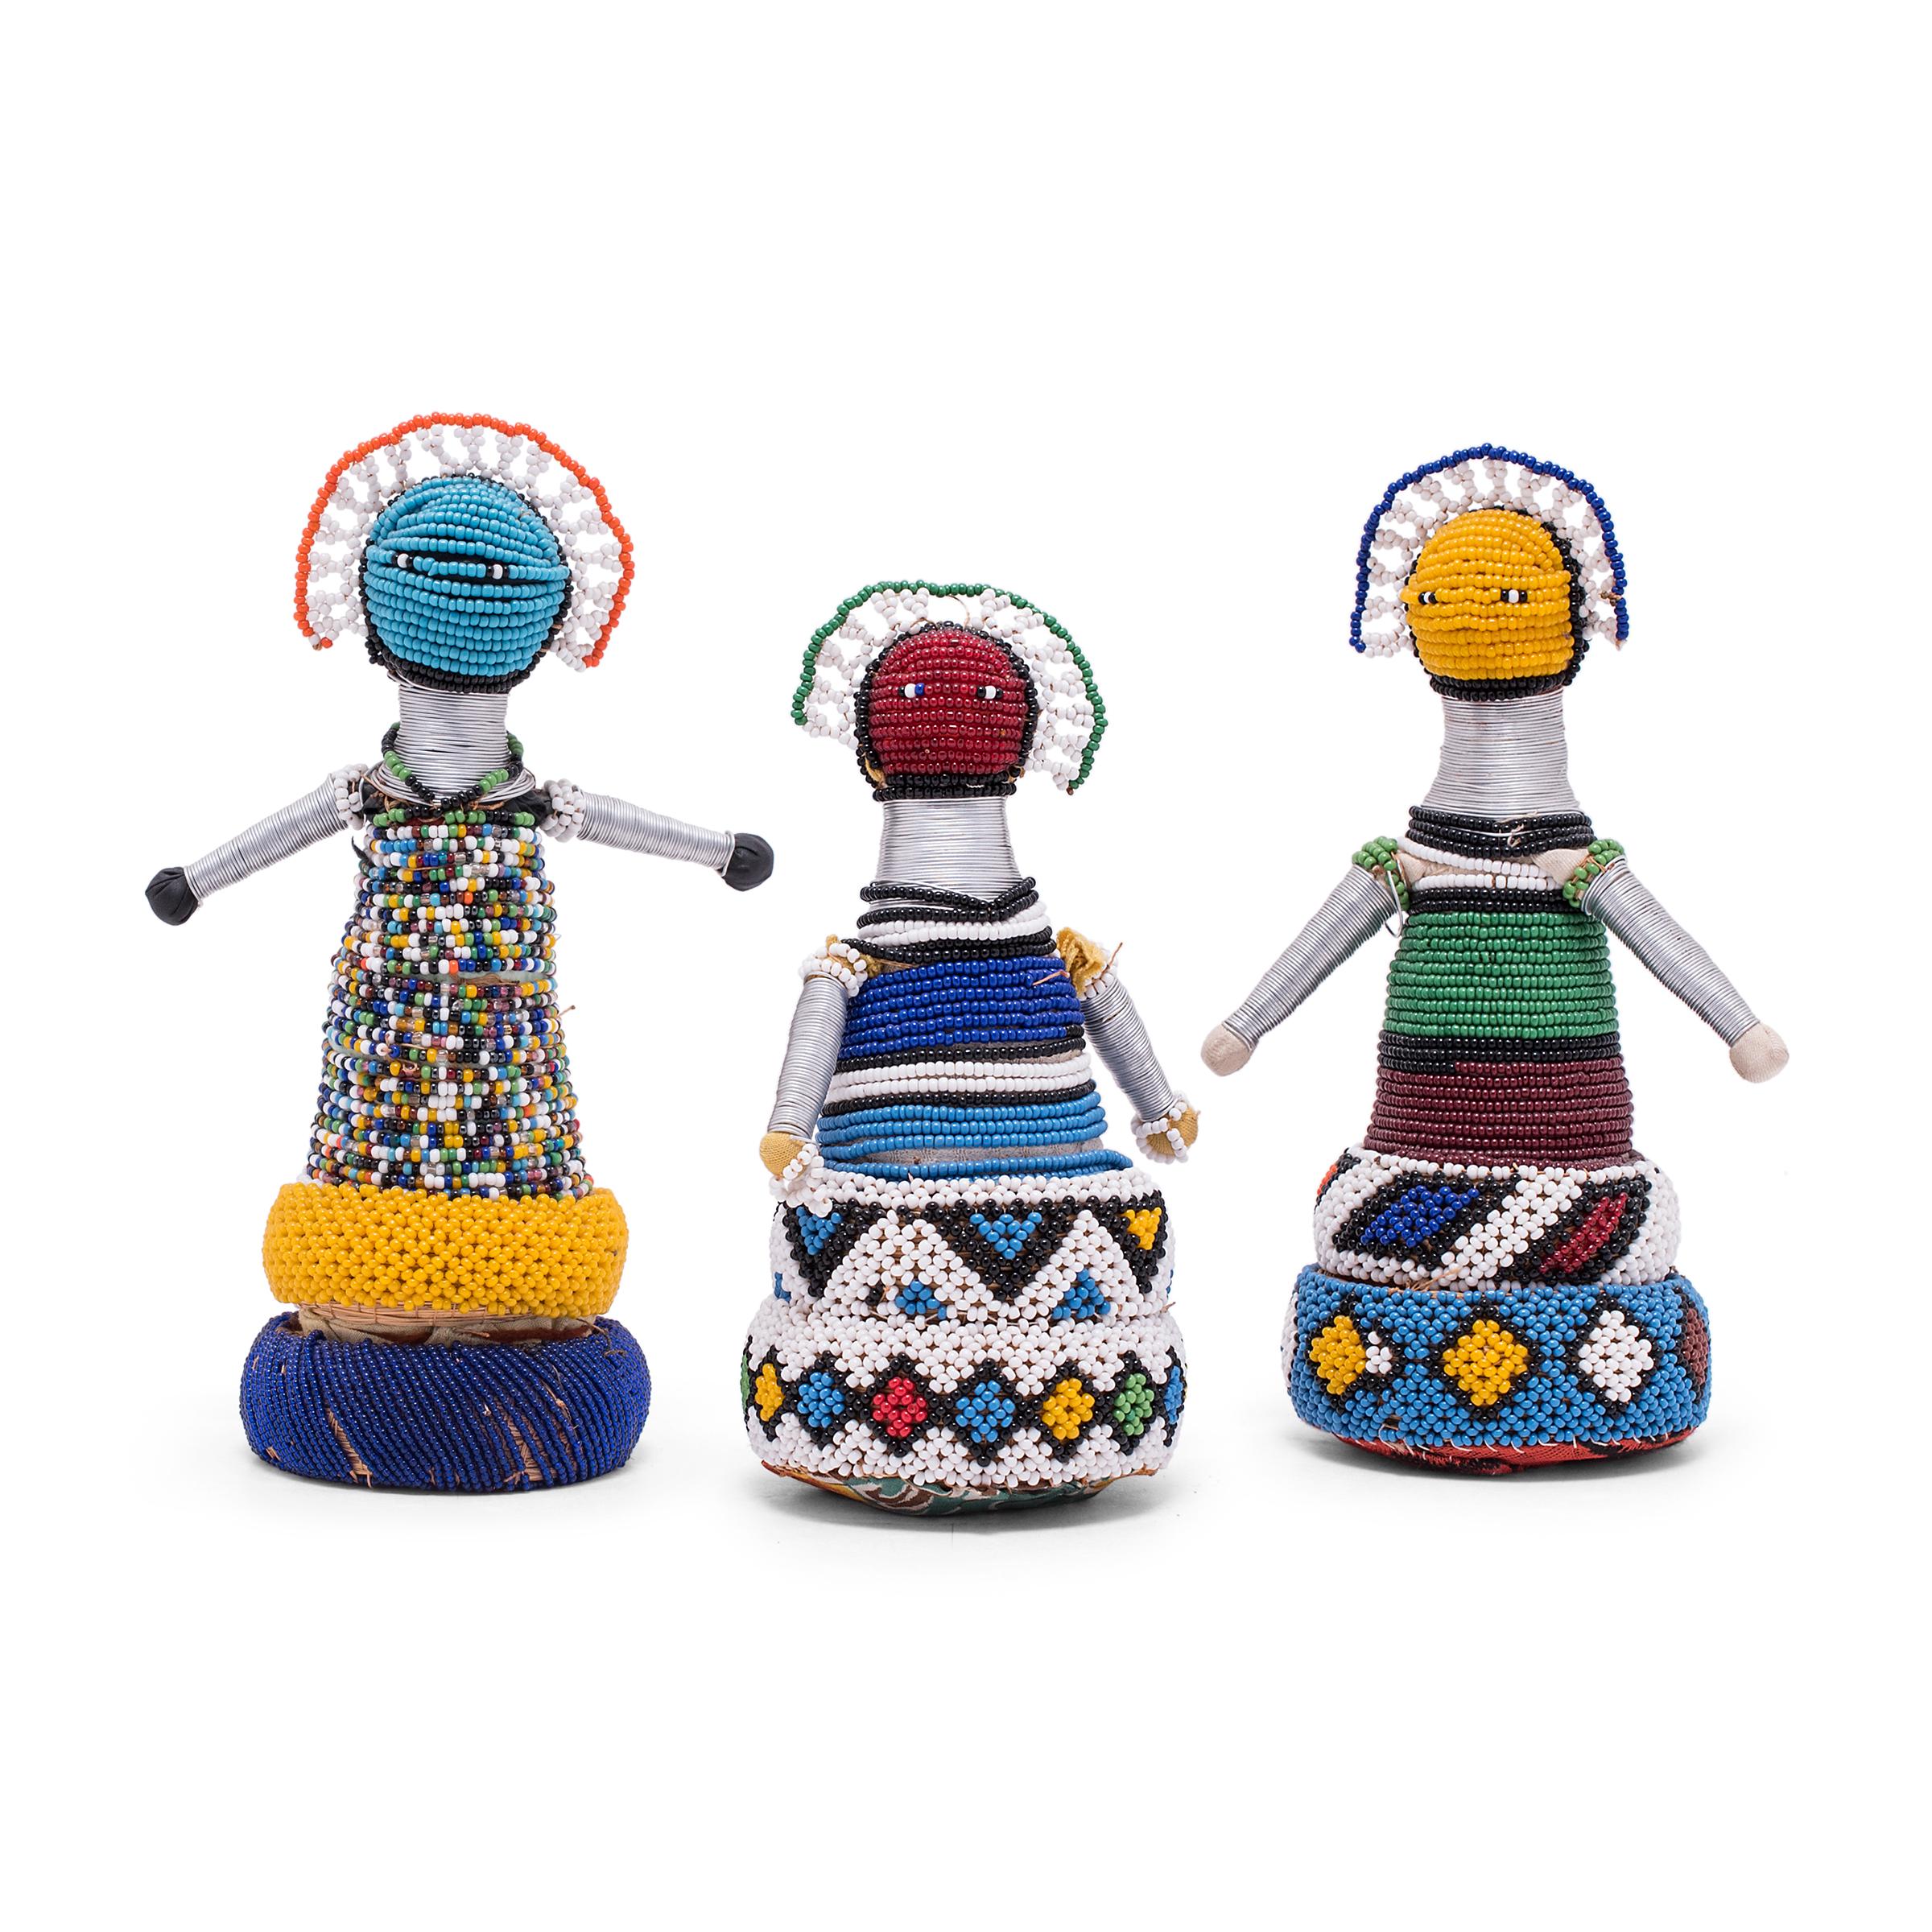 South African Beaded Ndebele Fertility Doll